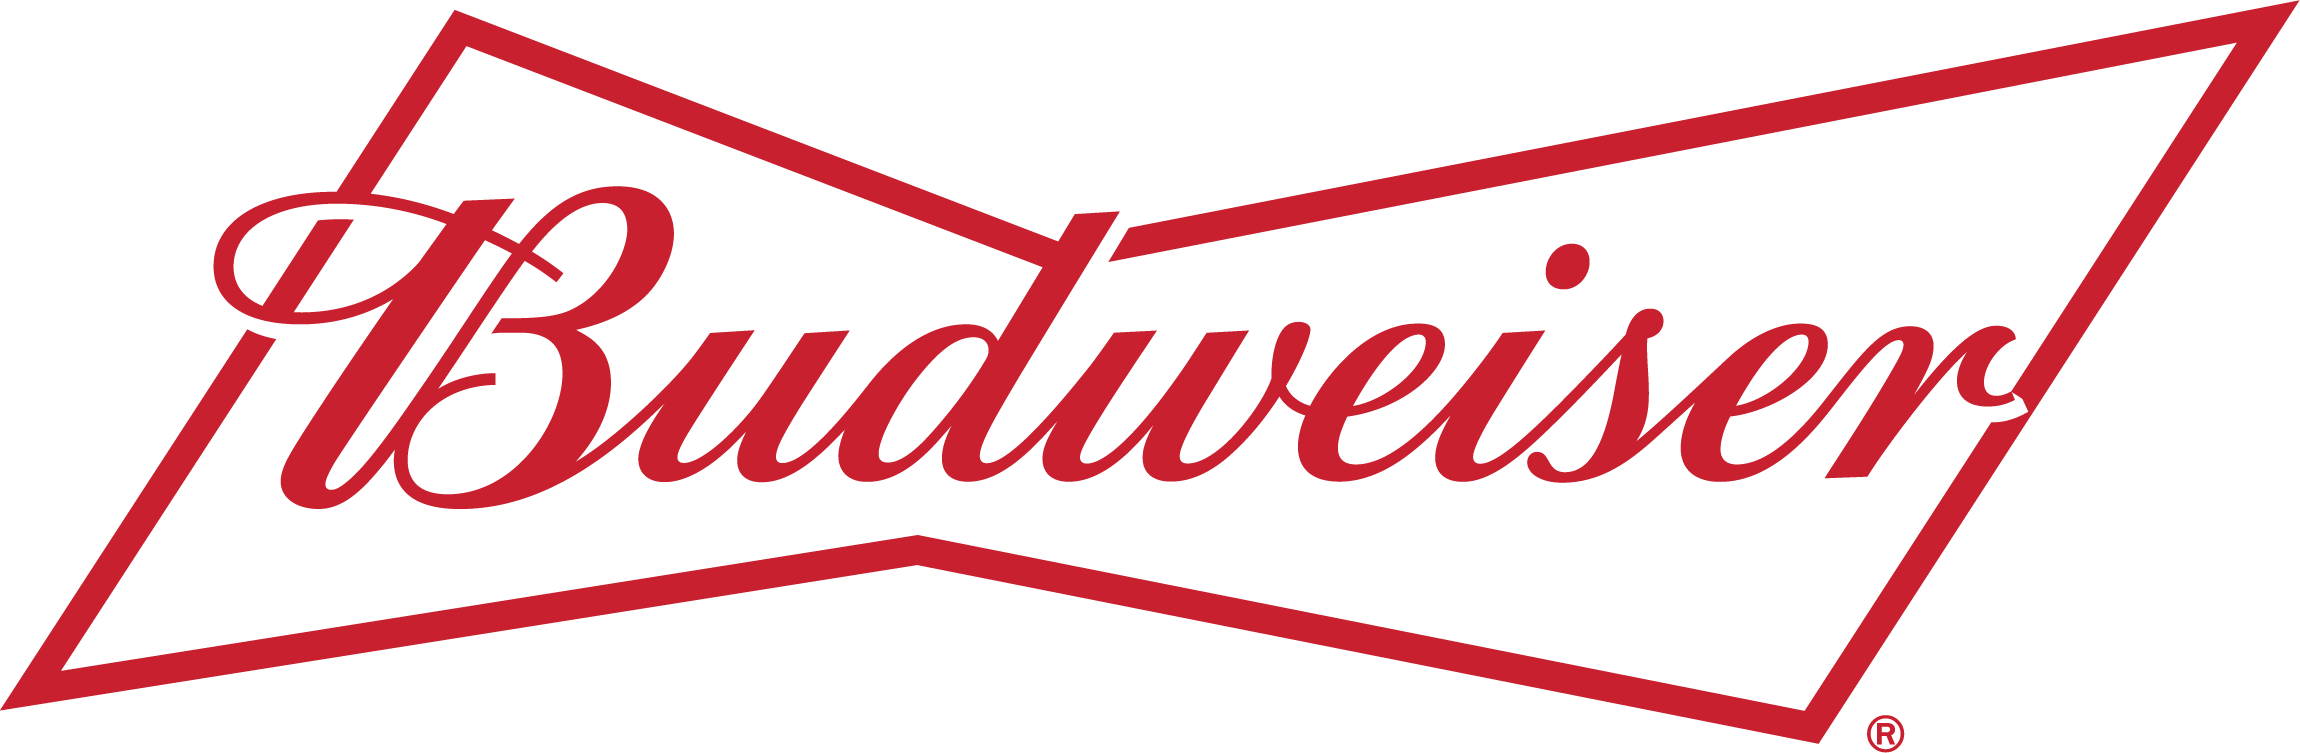 budlogo_red.png